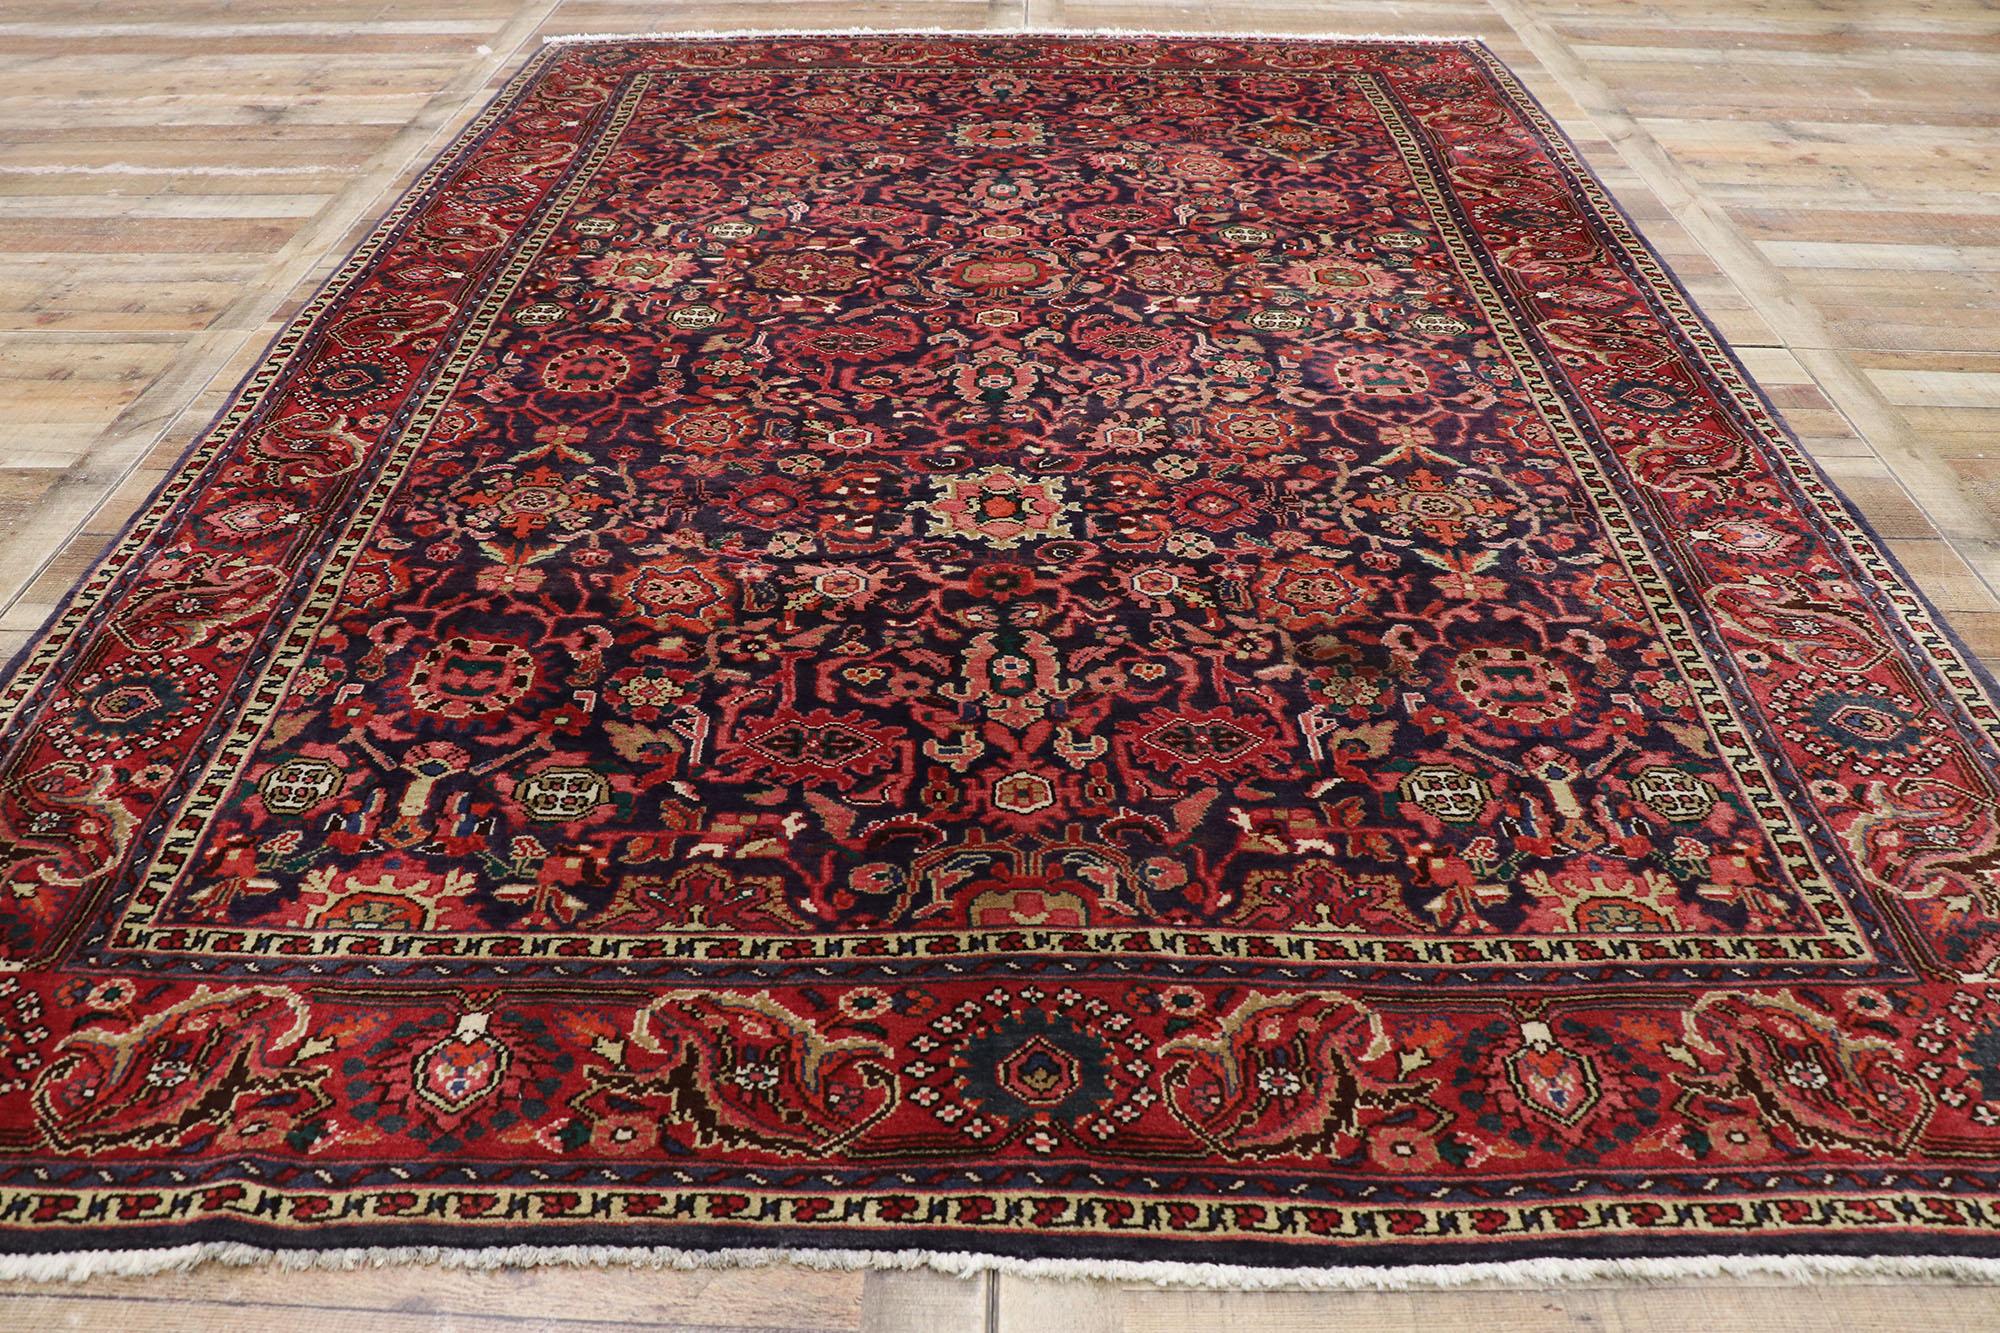 Wool Antique Persian Malayer Rug with Regal Victorian Style